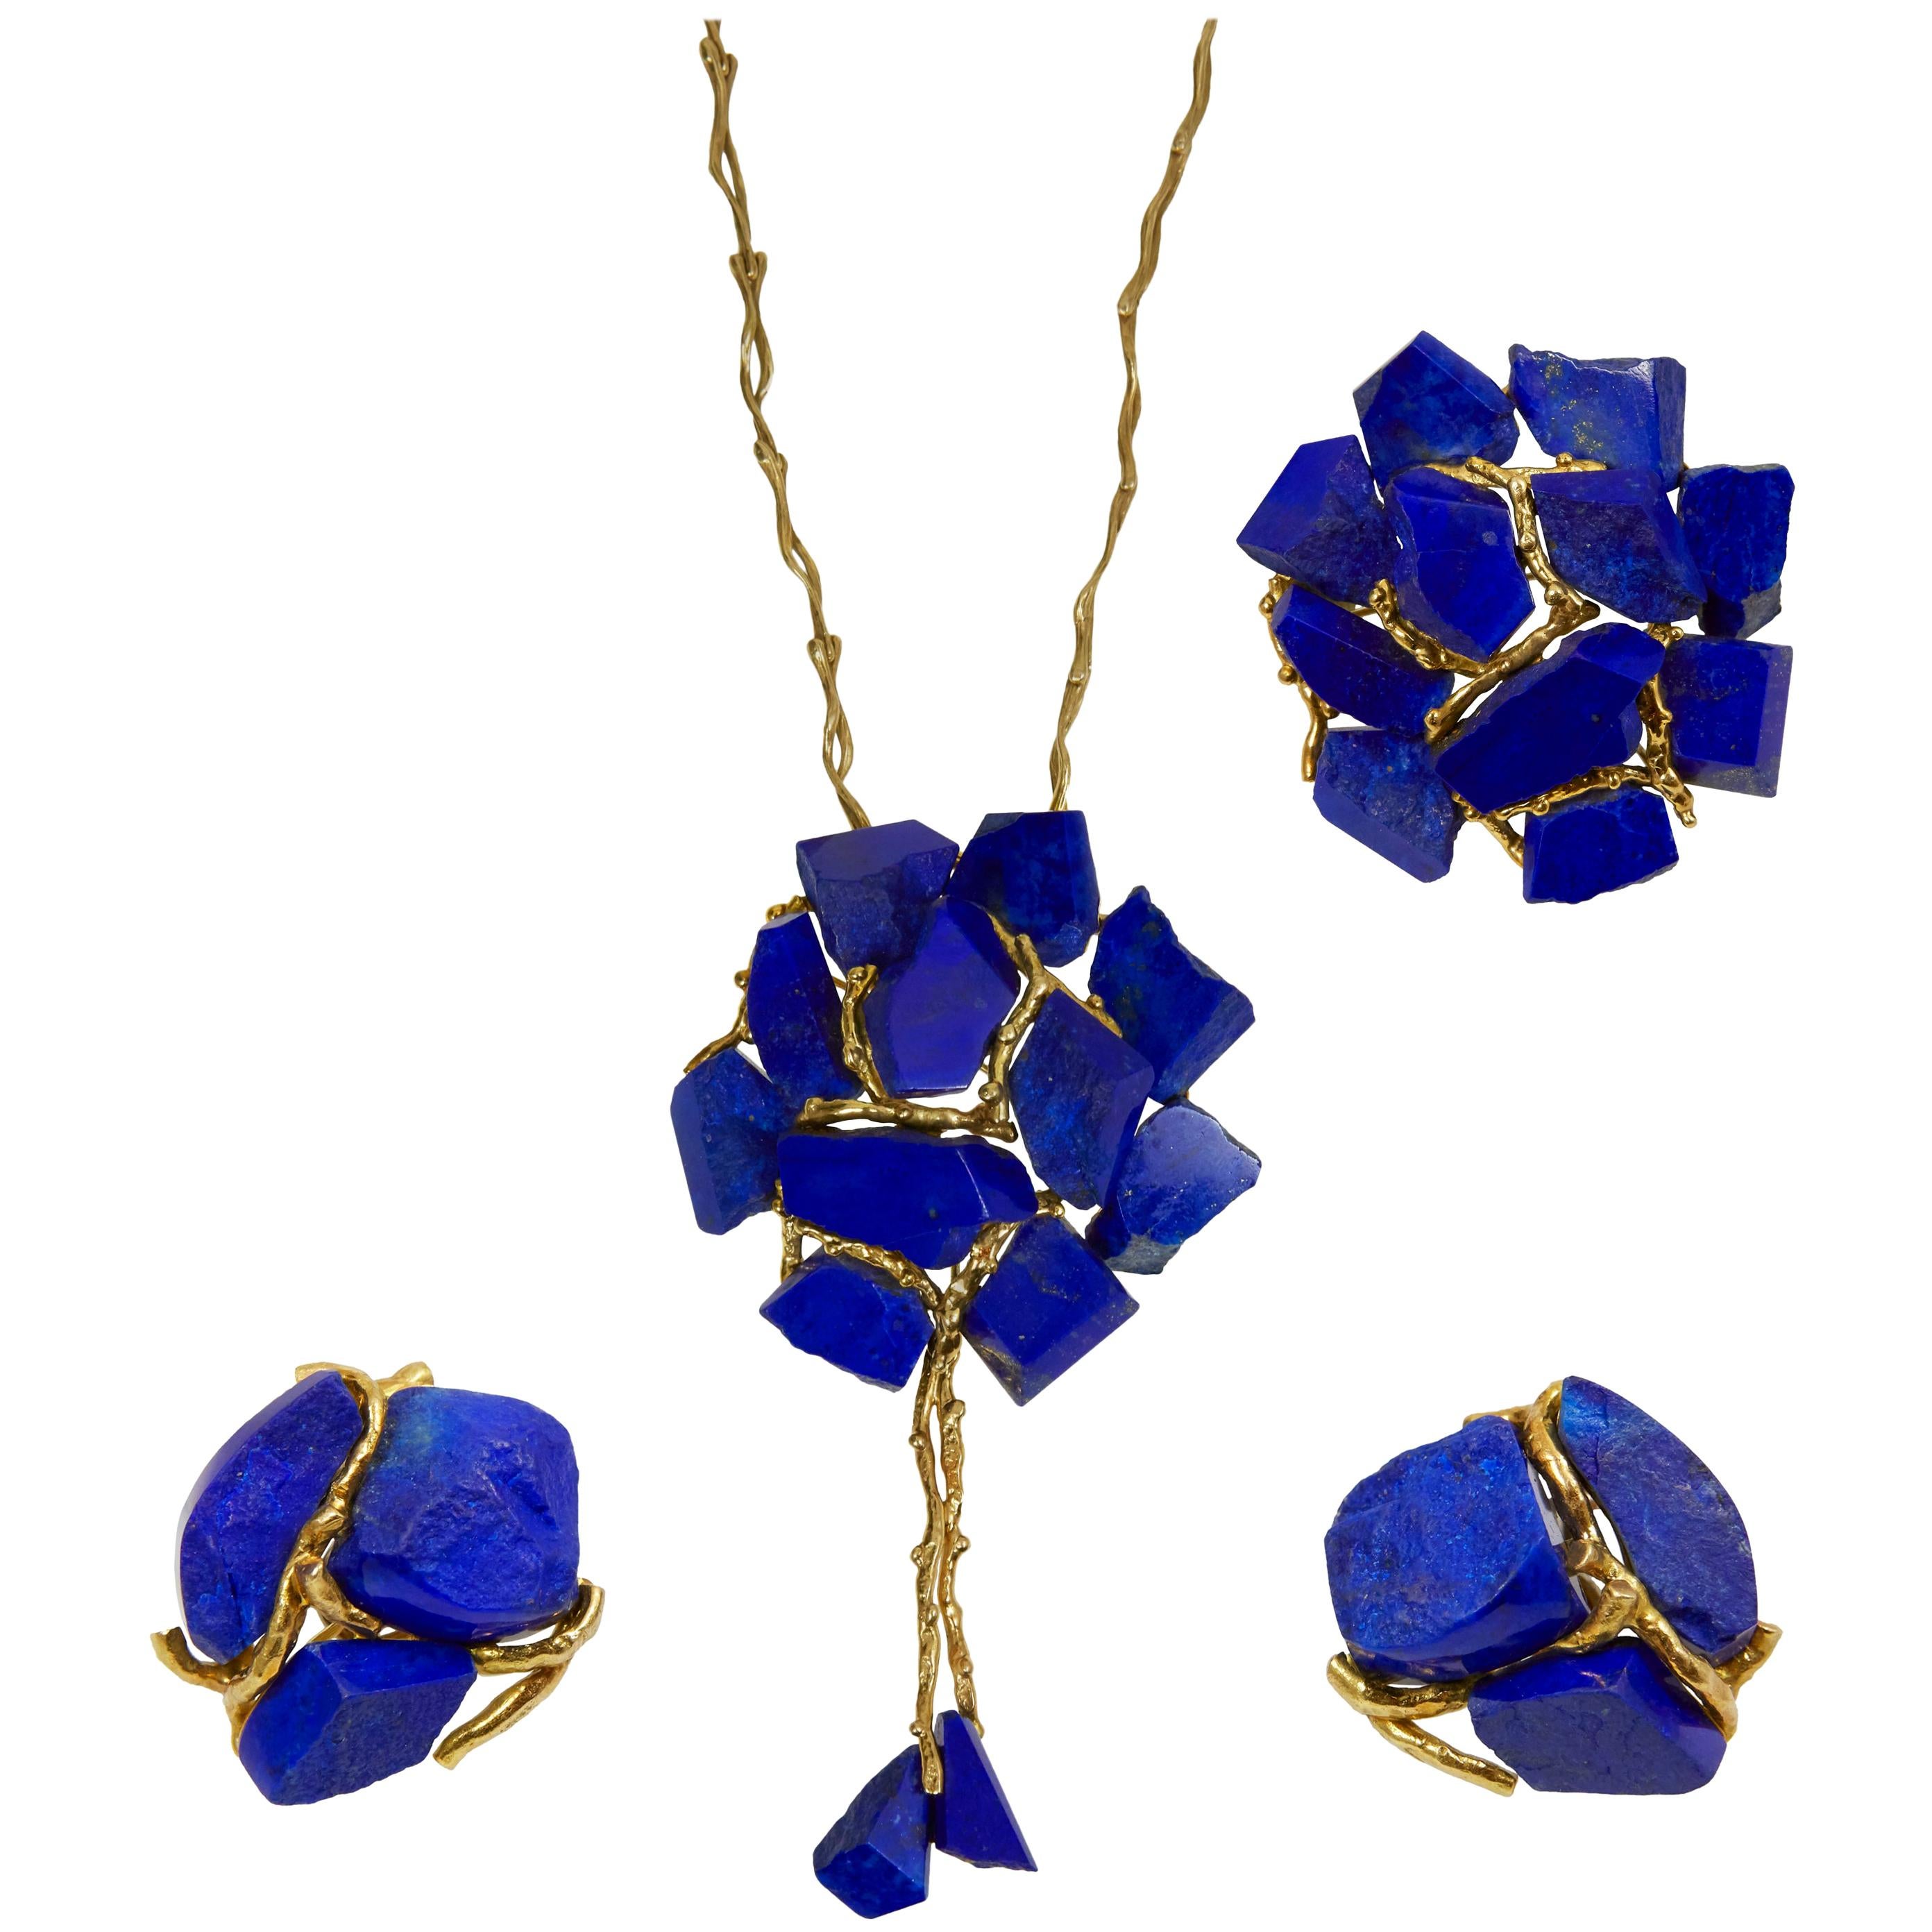 Augustin Julia Plana, Lapis Lazuli and Gold Necklace and Ear Clips Set